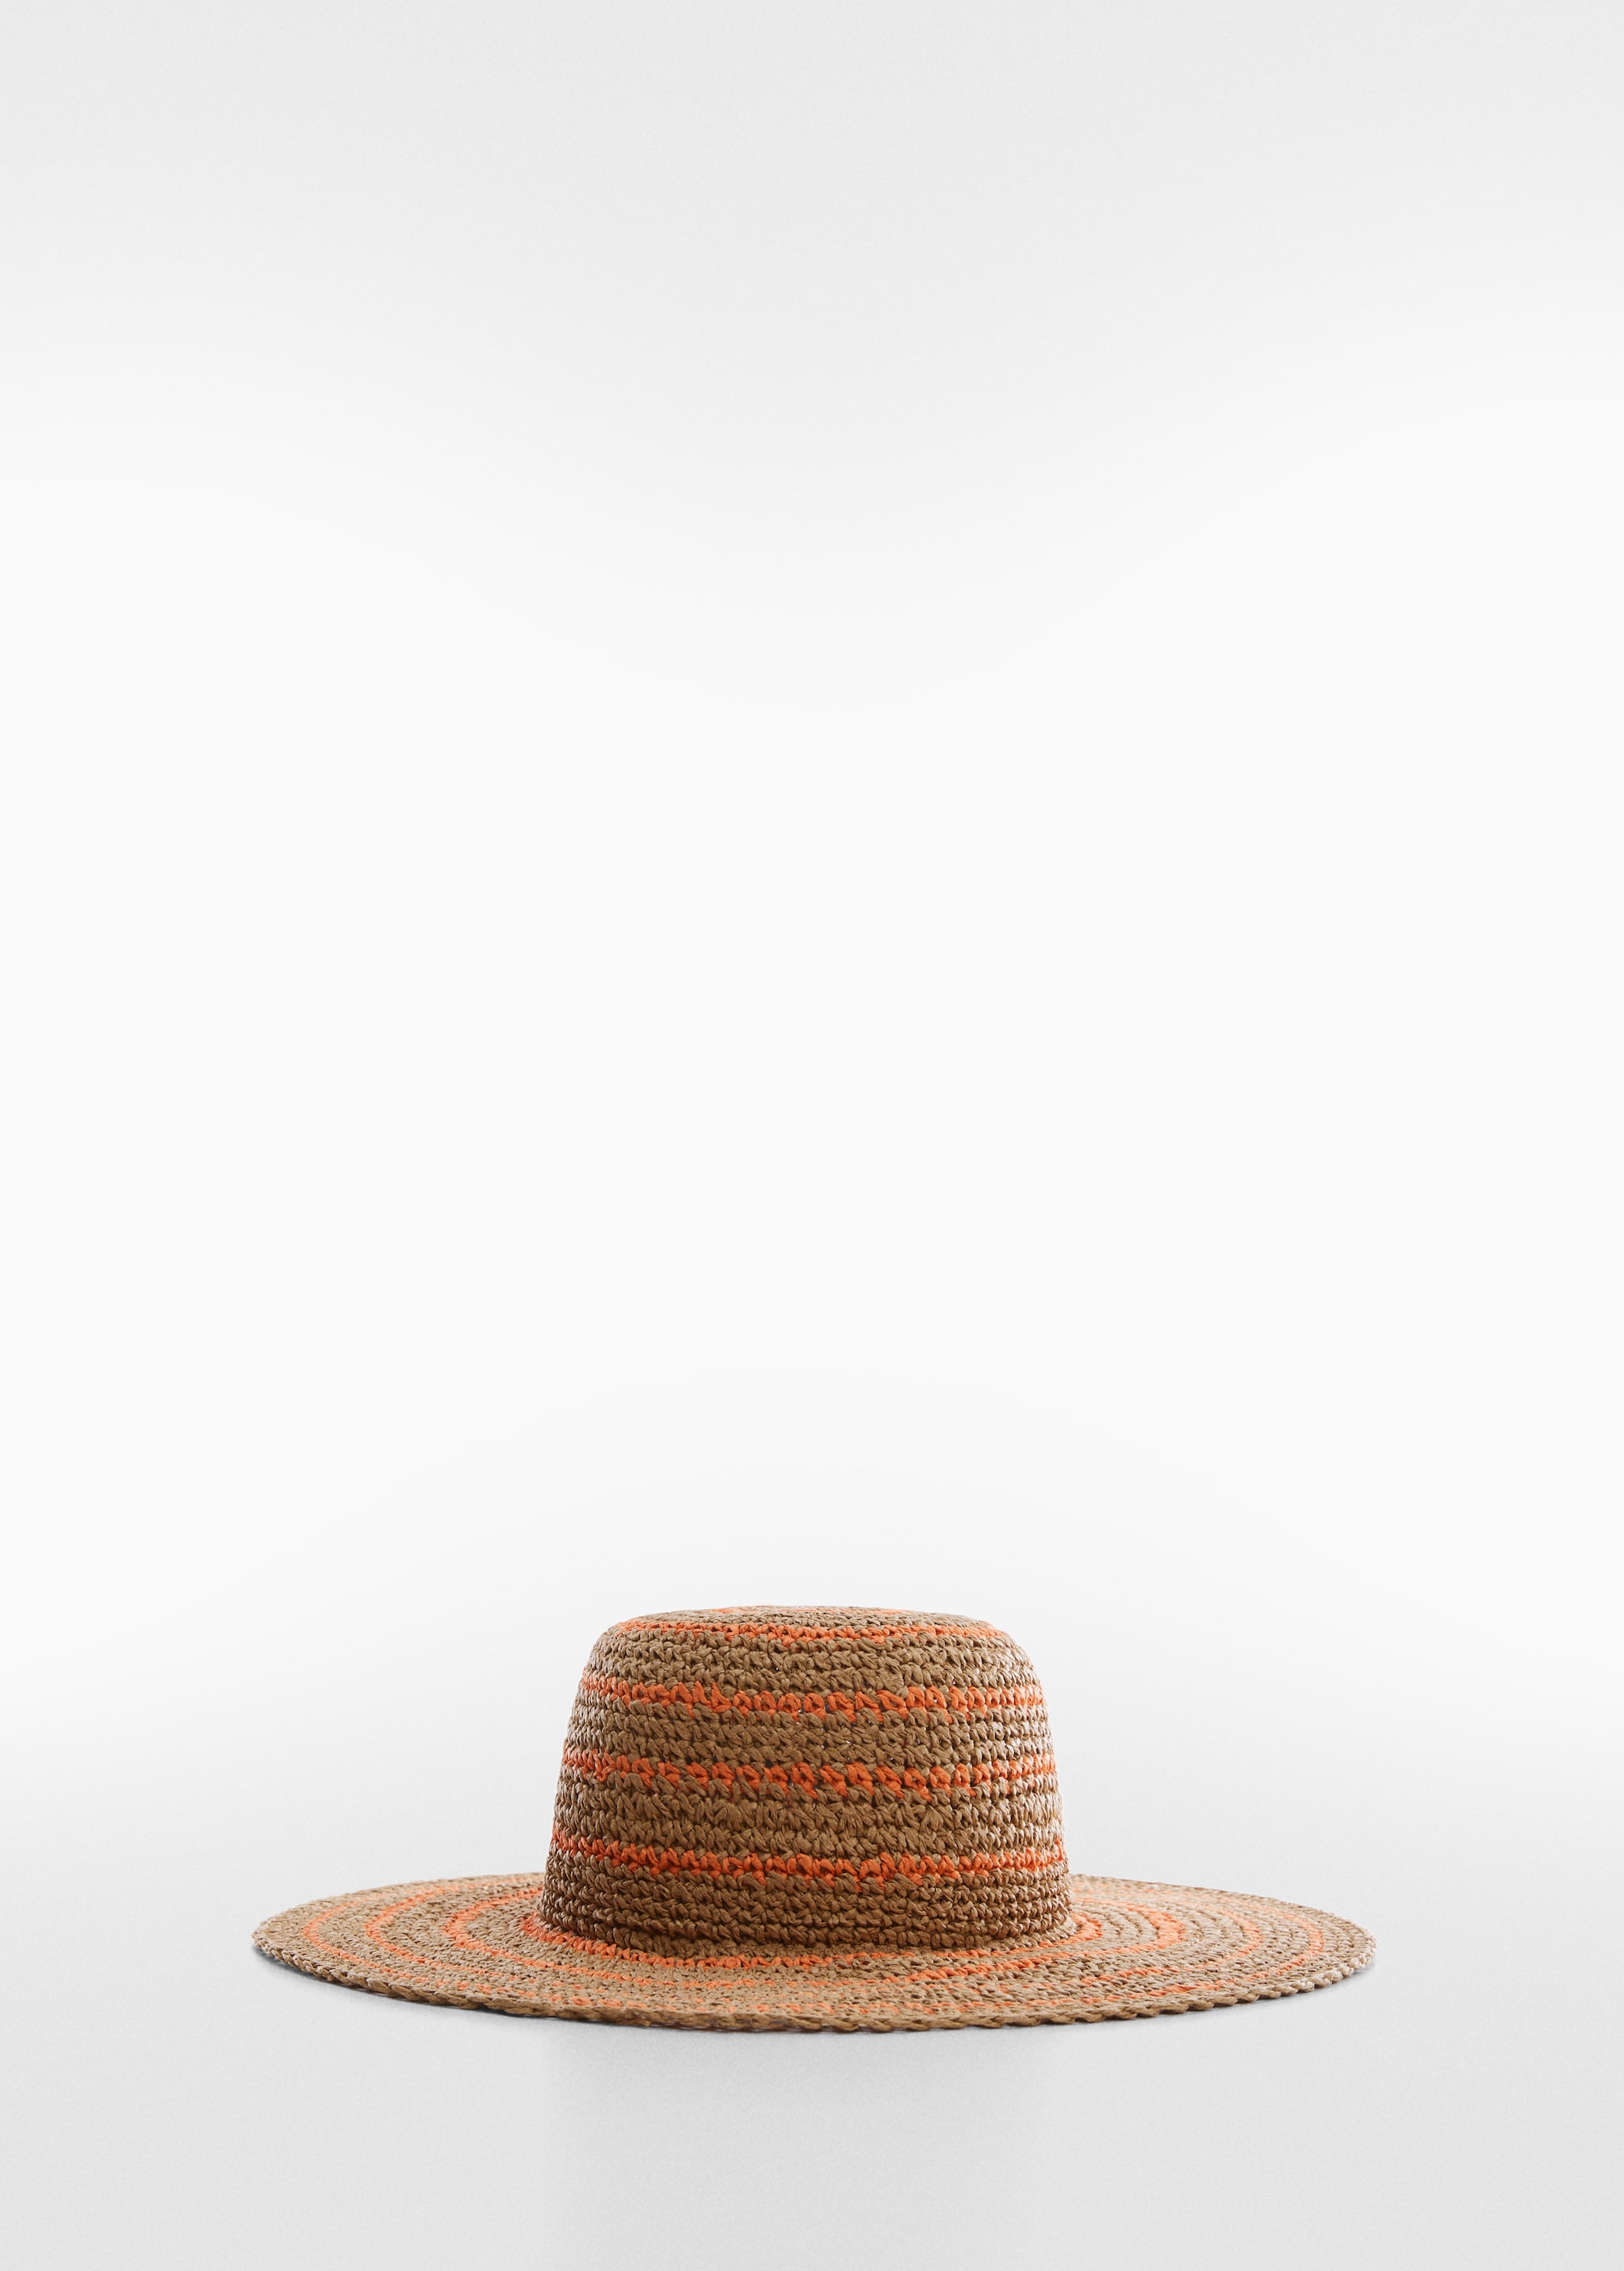 Two-tone natural fibre hat - Article without model